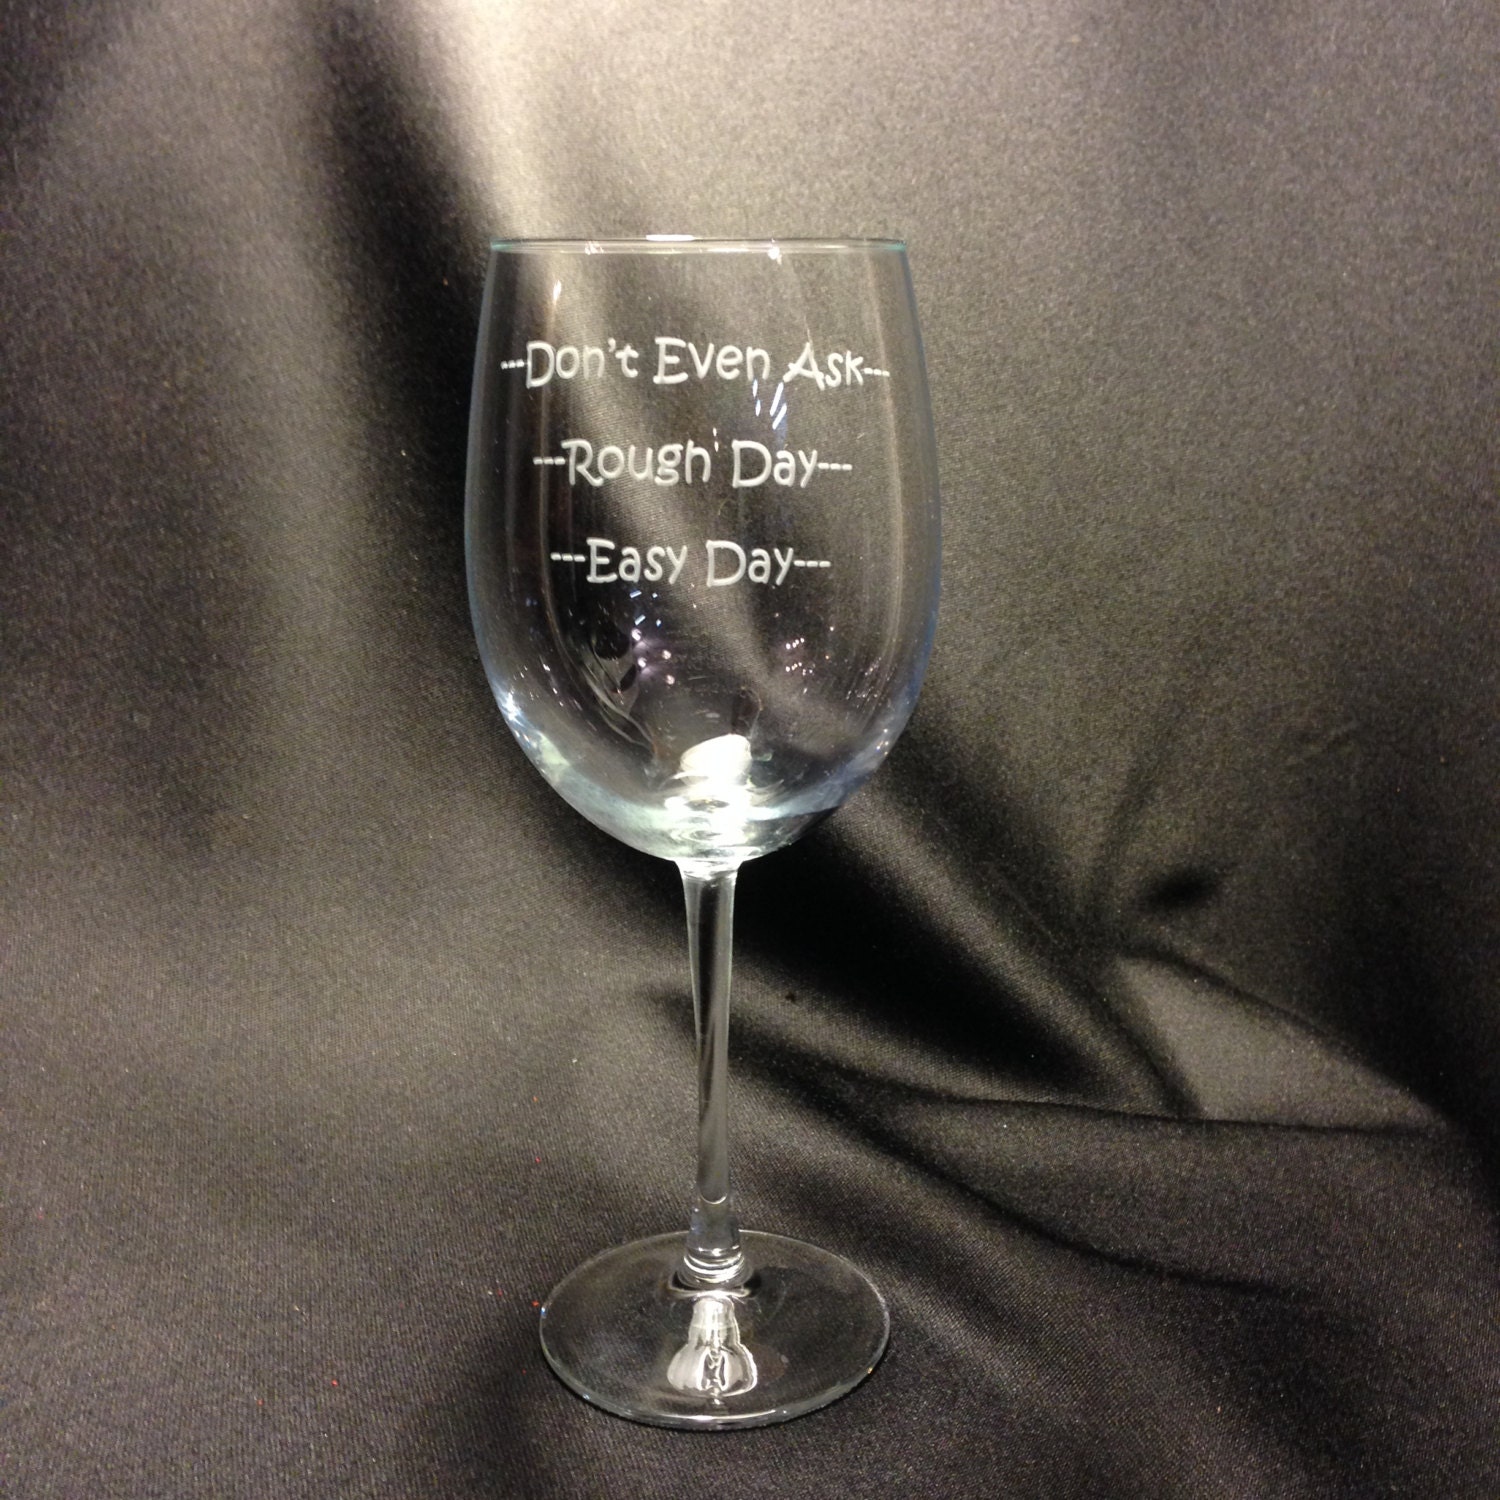 19oz Wine Glasses With Funny Saying